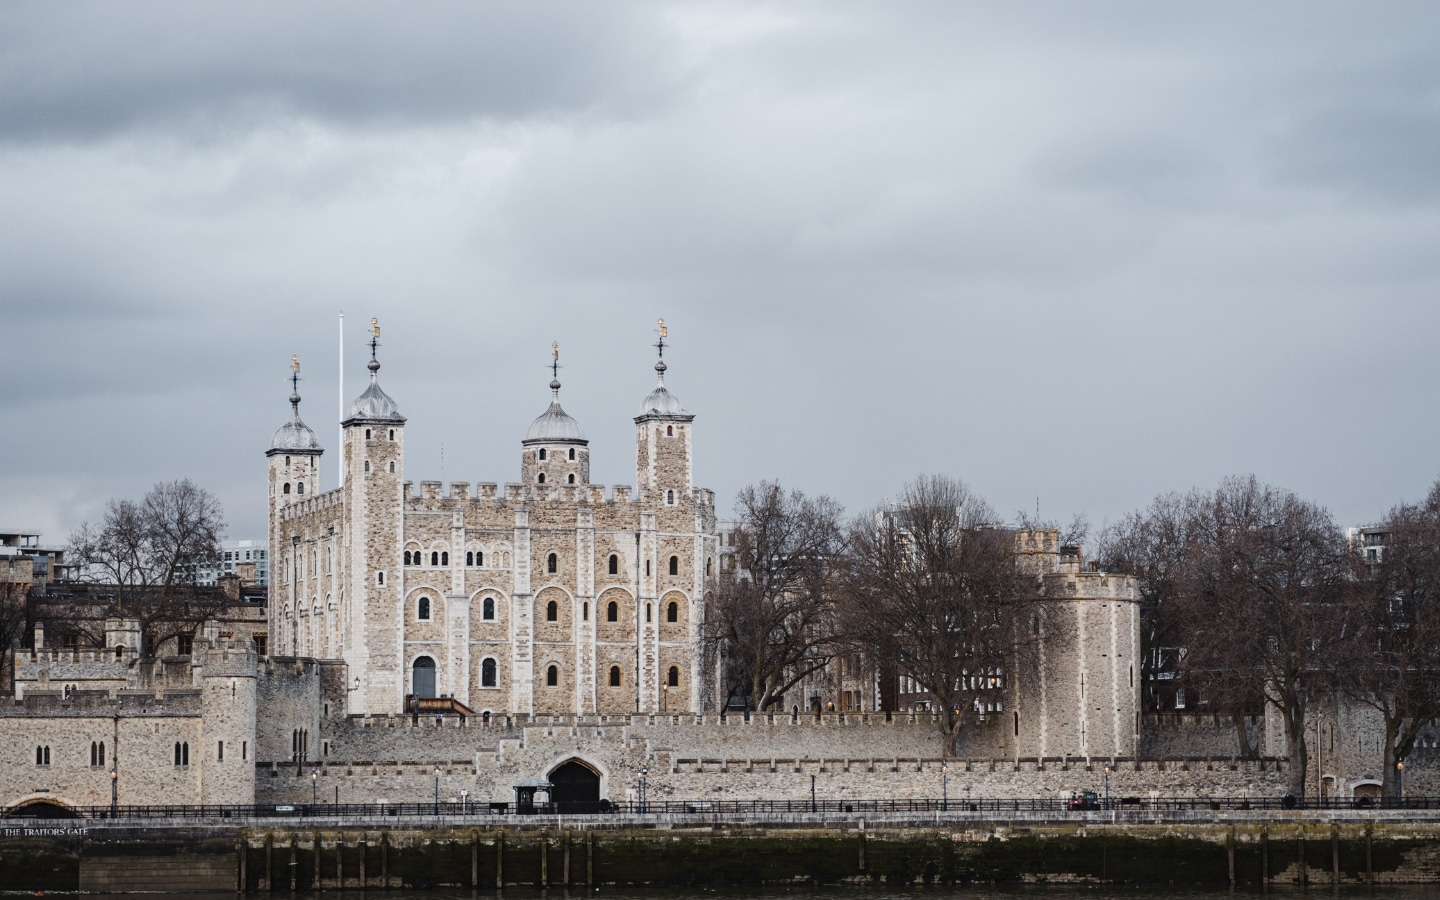 Tower Of London in December